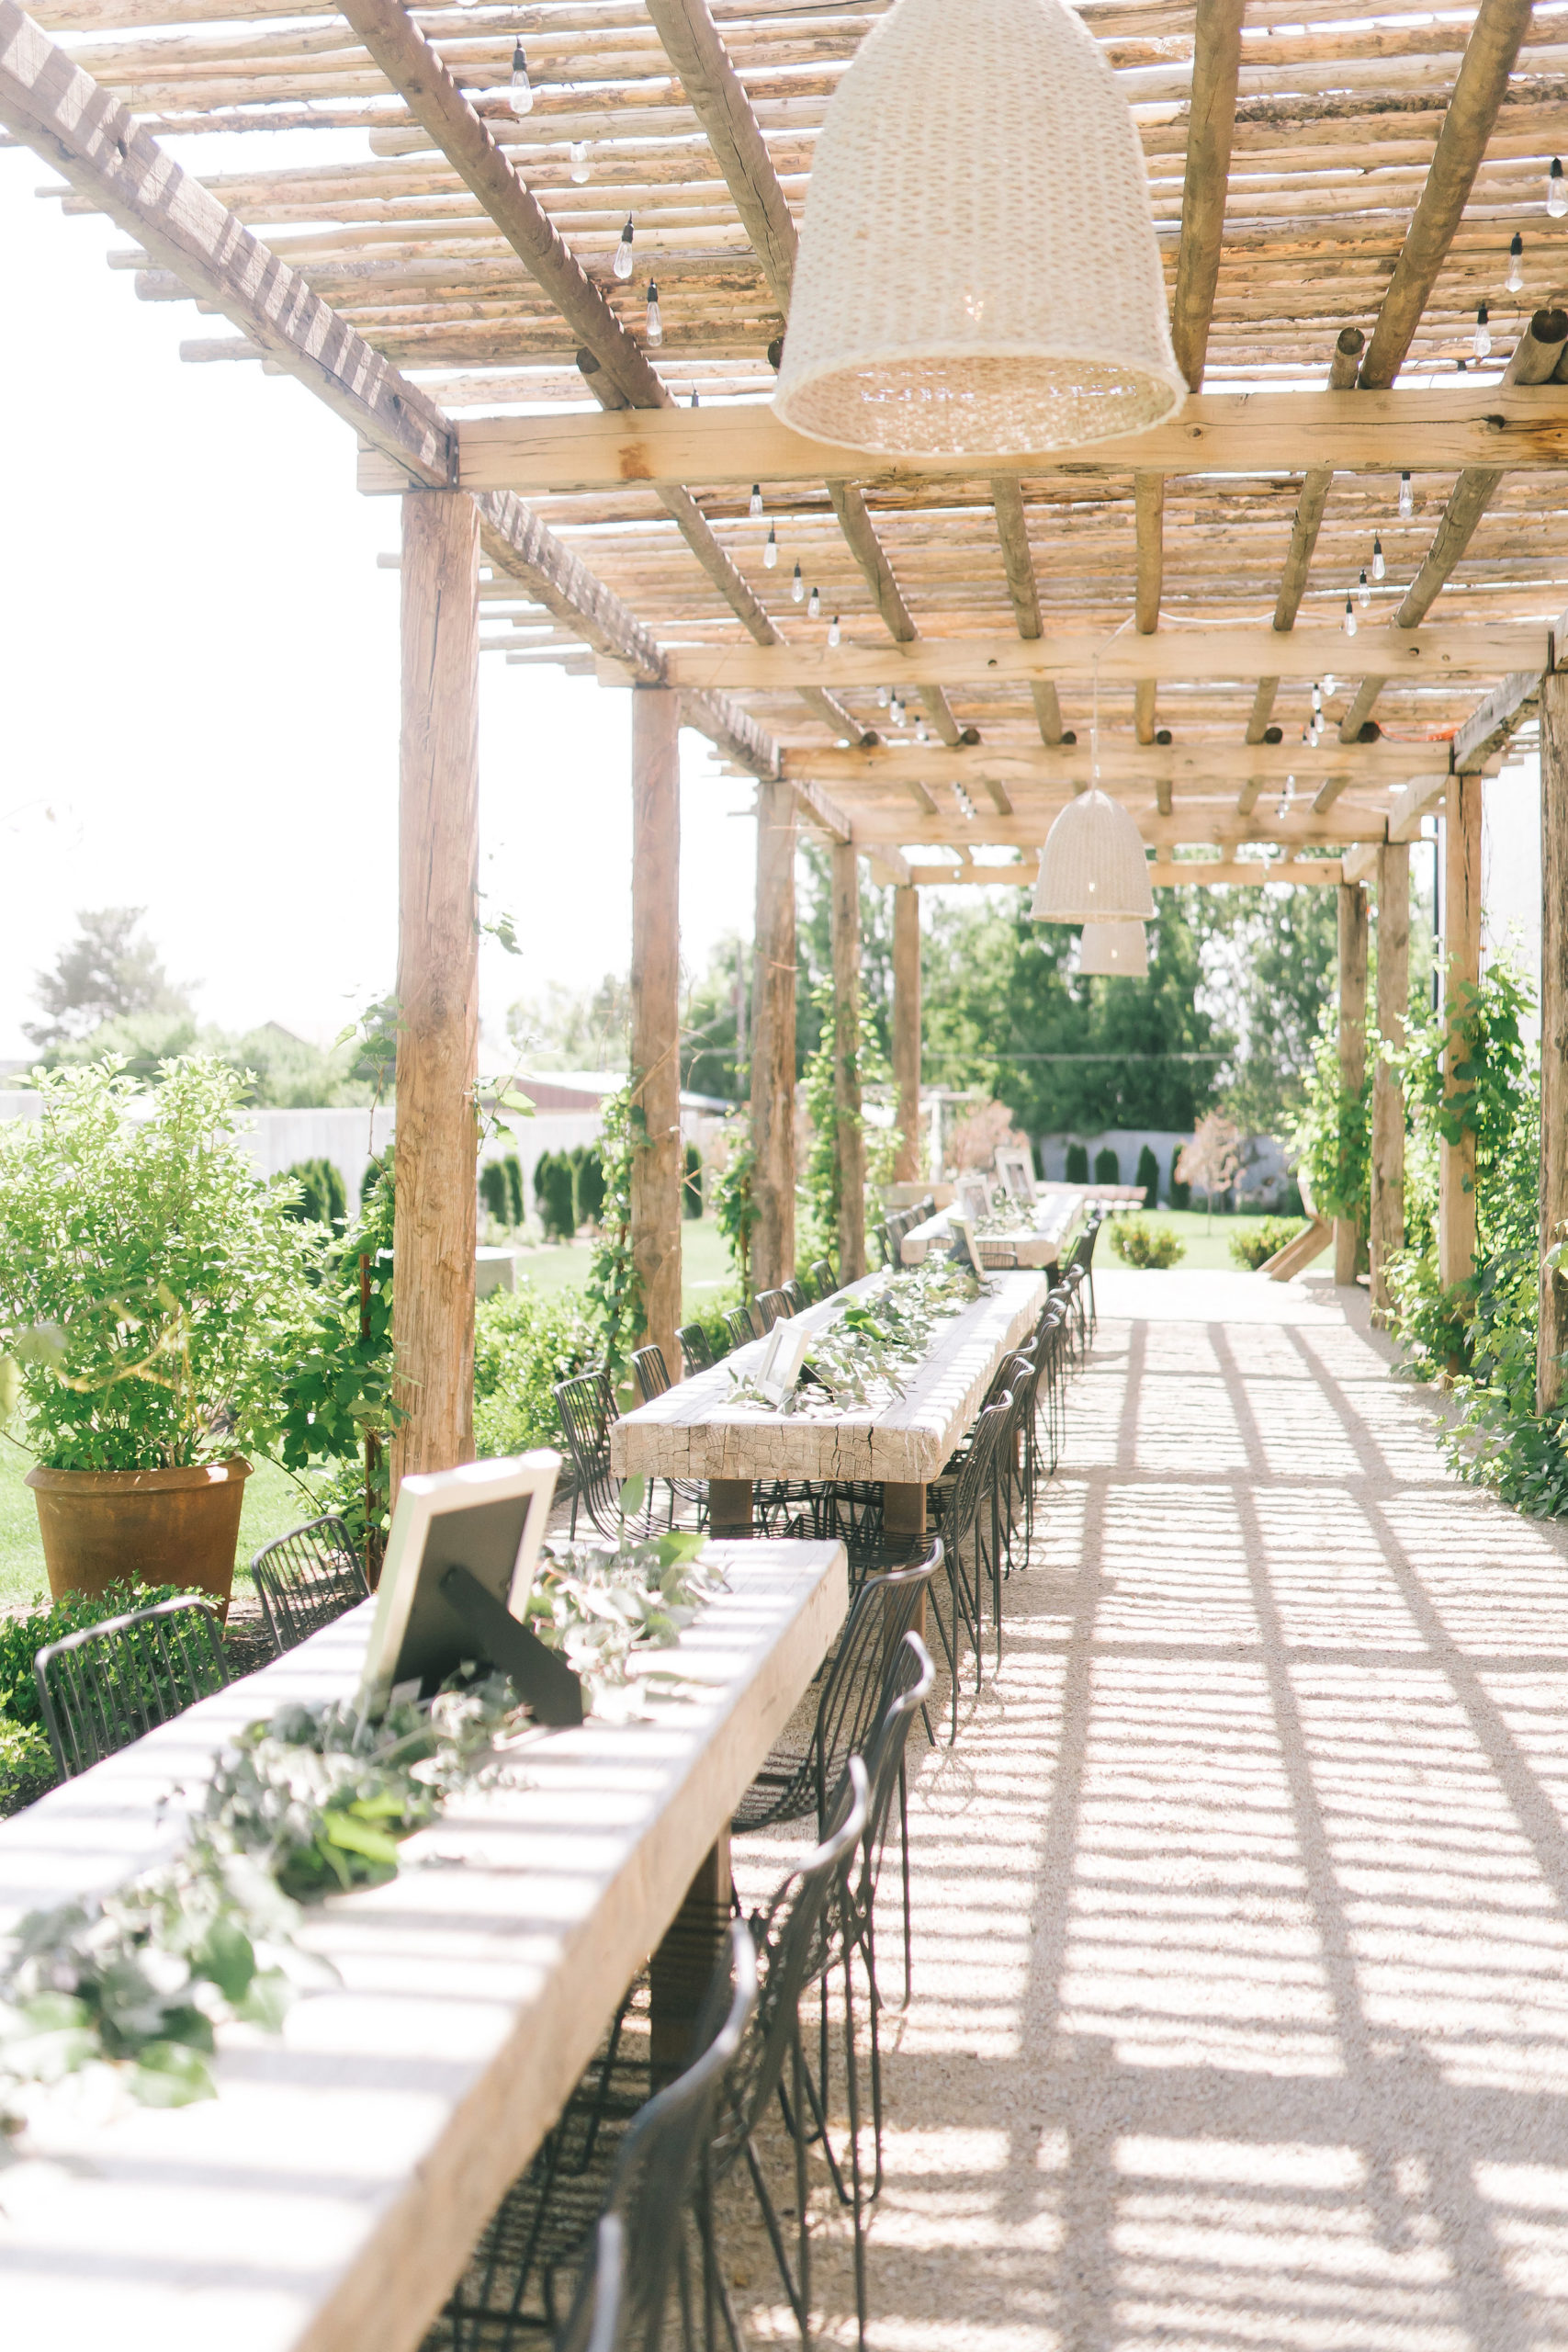 Italian wedding with outdoor table settings for a Spring wedding